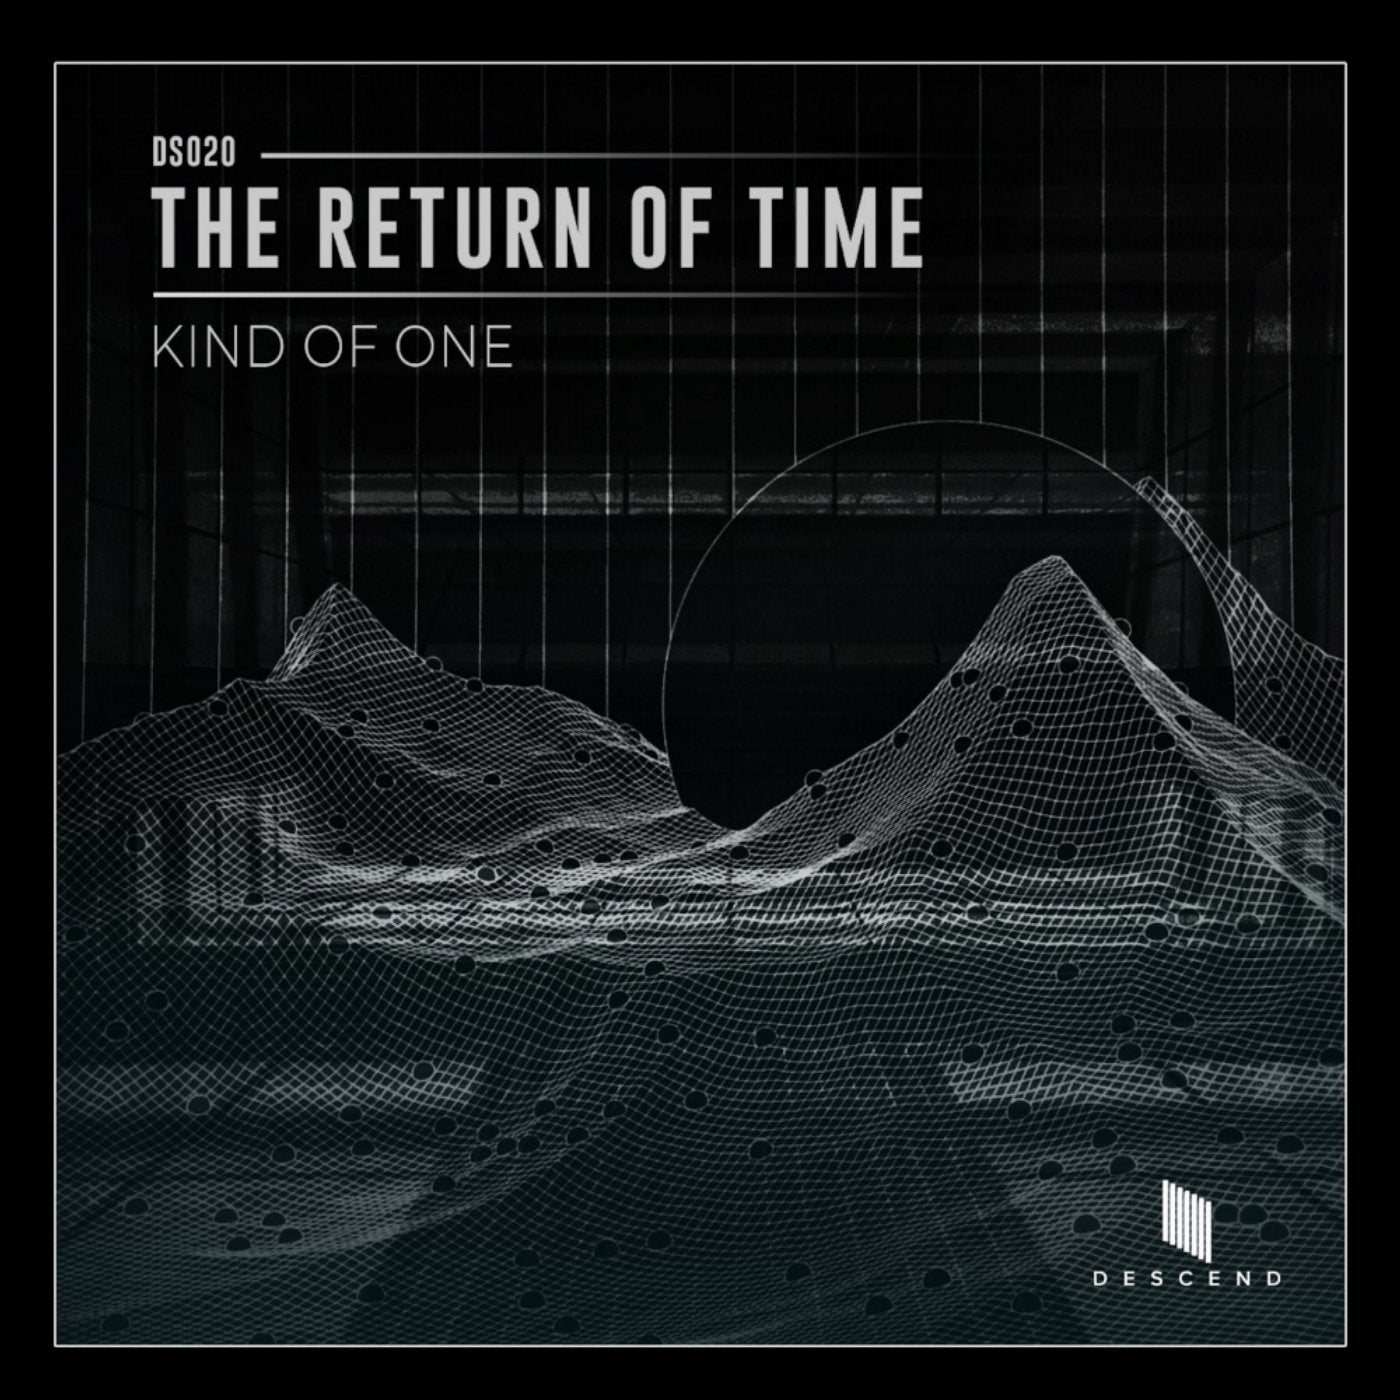 The Return of Time